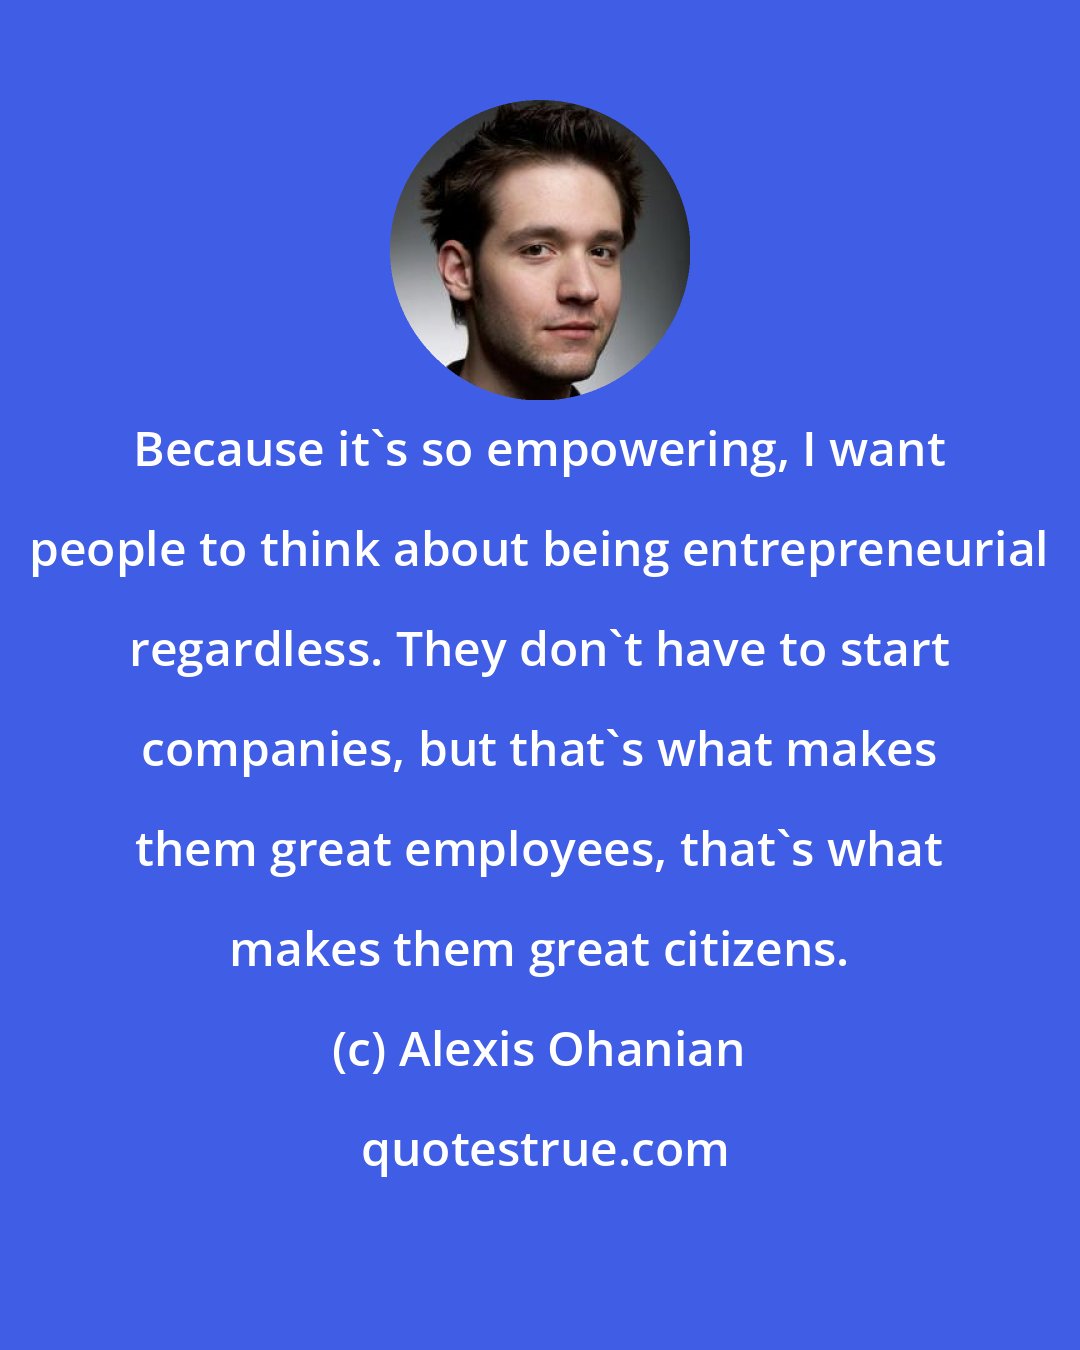 Alexis Ohanian: Because it's so empowering, I want people to think about being entrepreneurial regardless. They don't have to start companies, but that's what makes them great employees, that's what makes them great citizens.